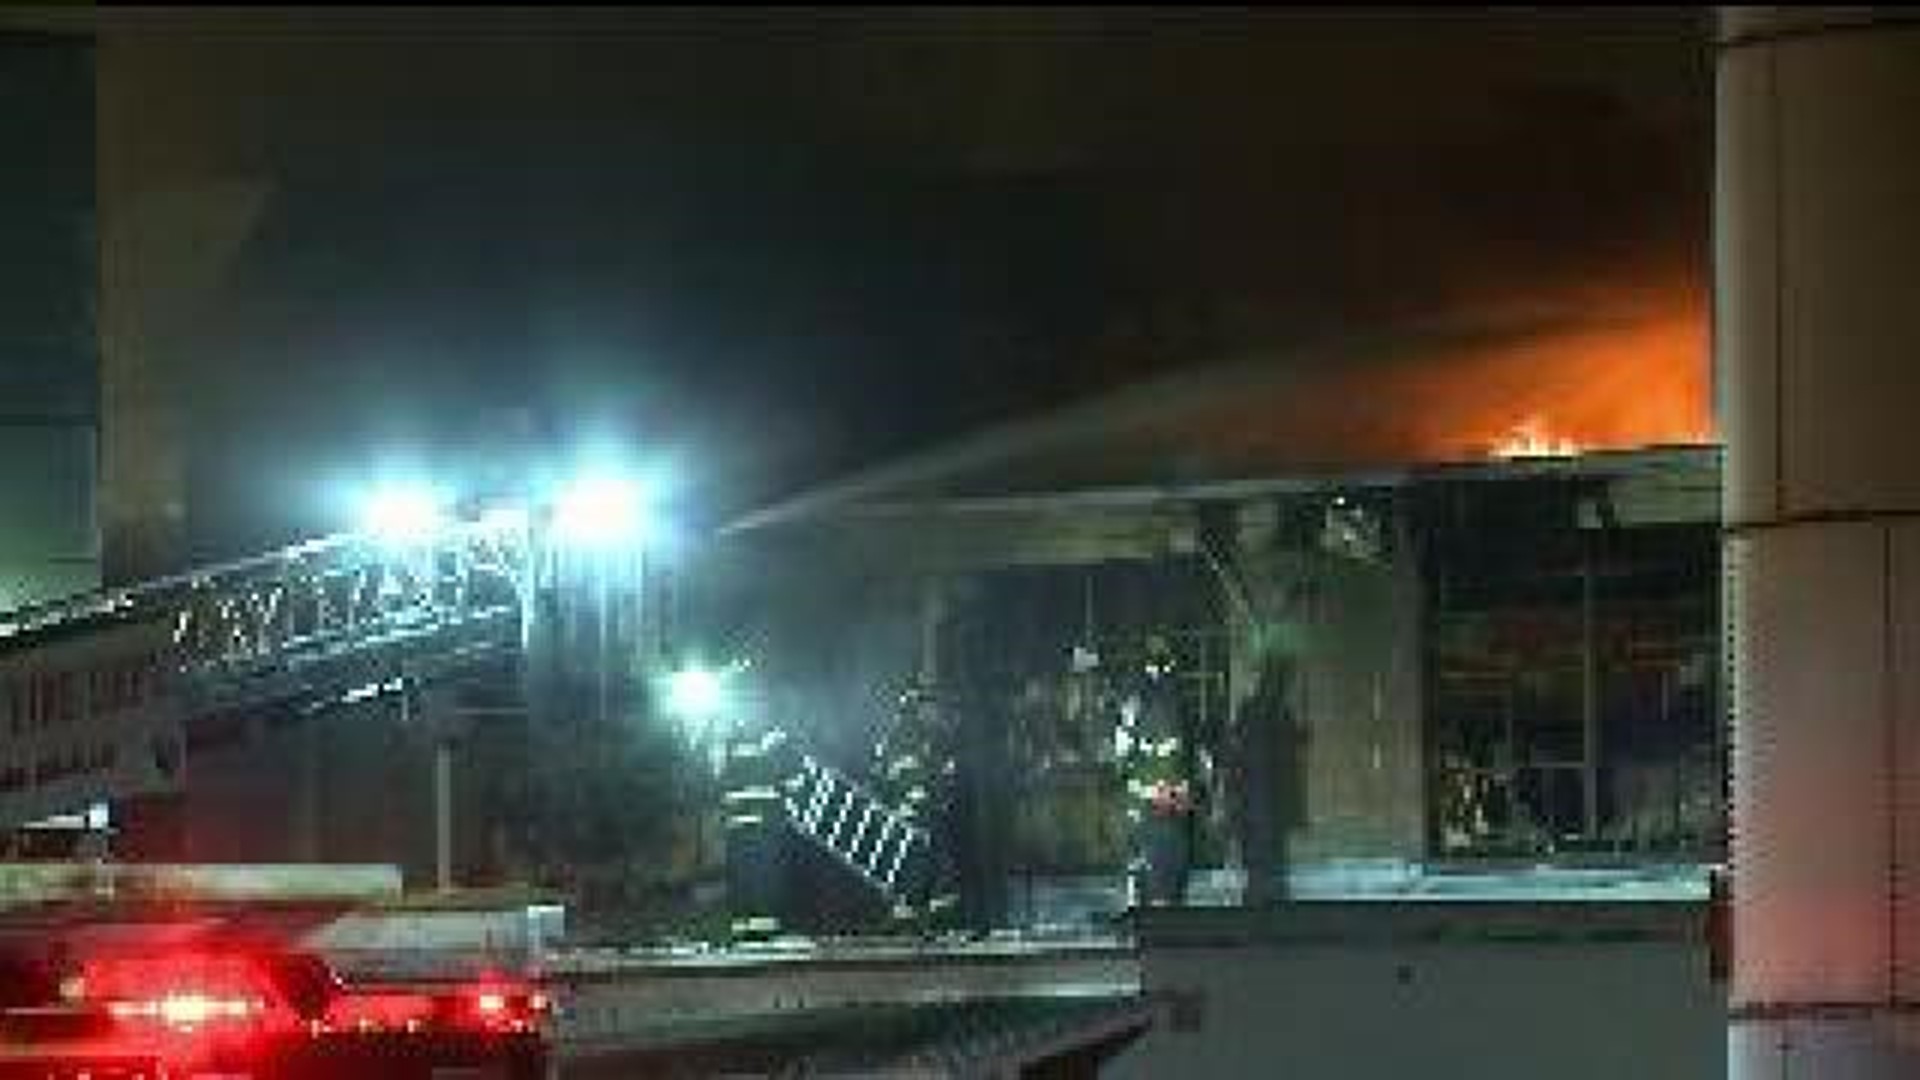 Plant Employees Unsure of Jobs After Fire